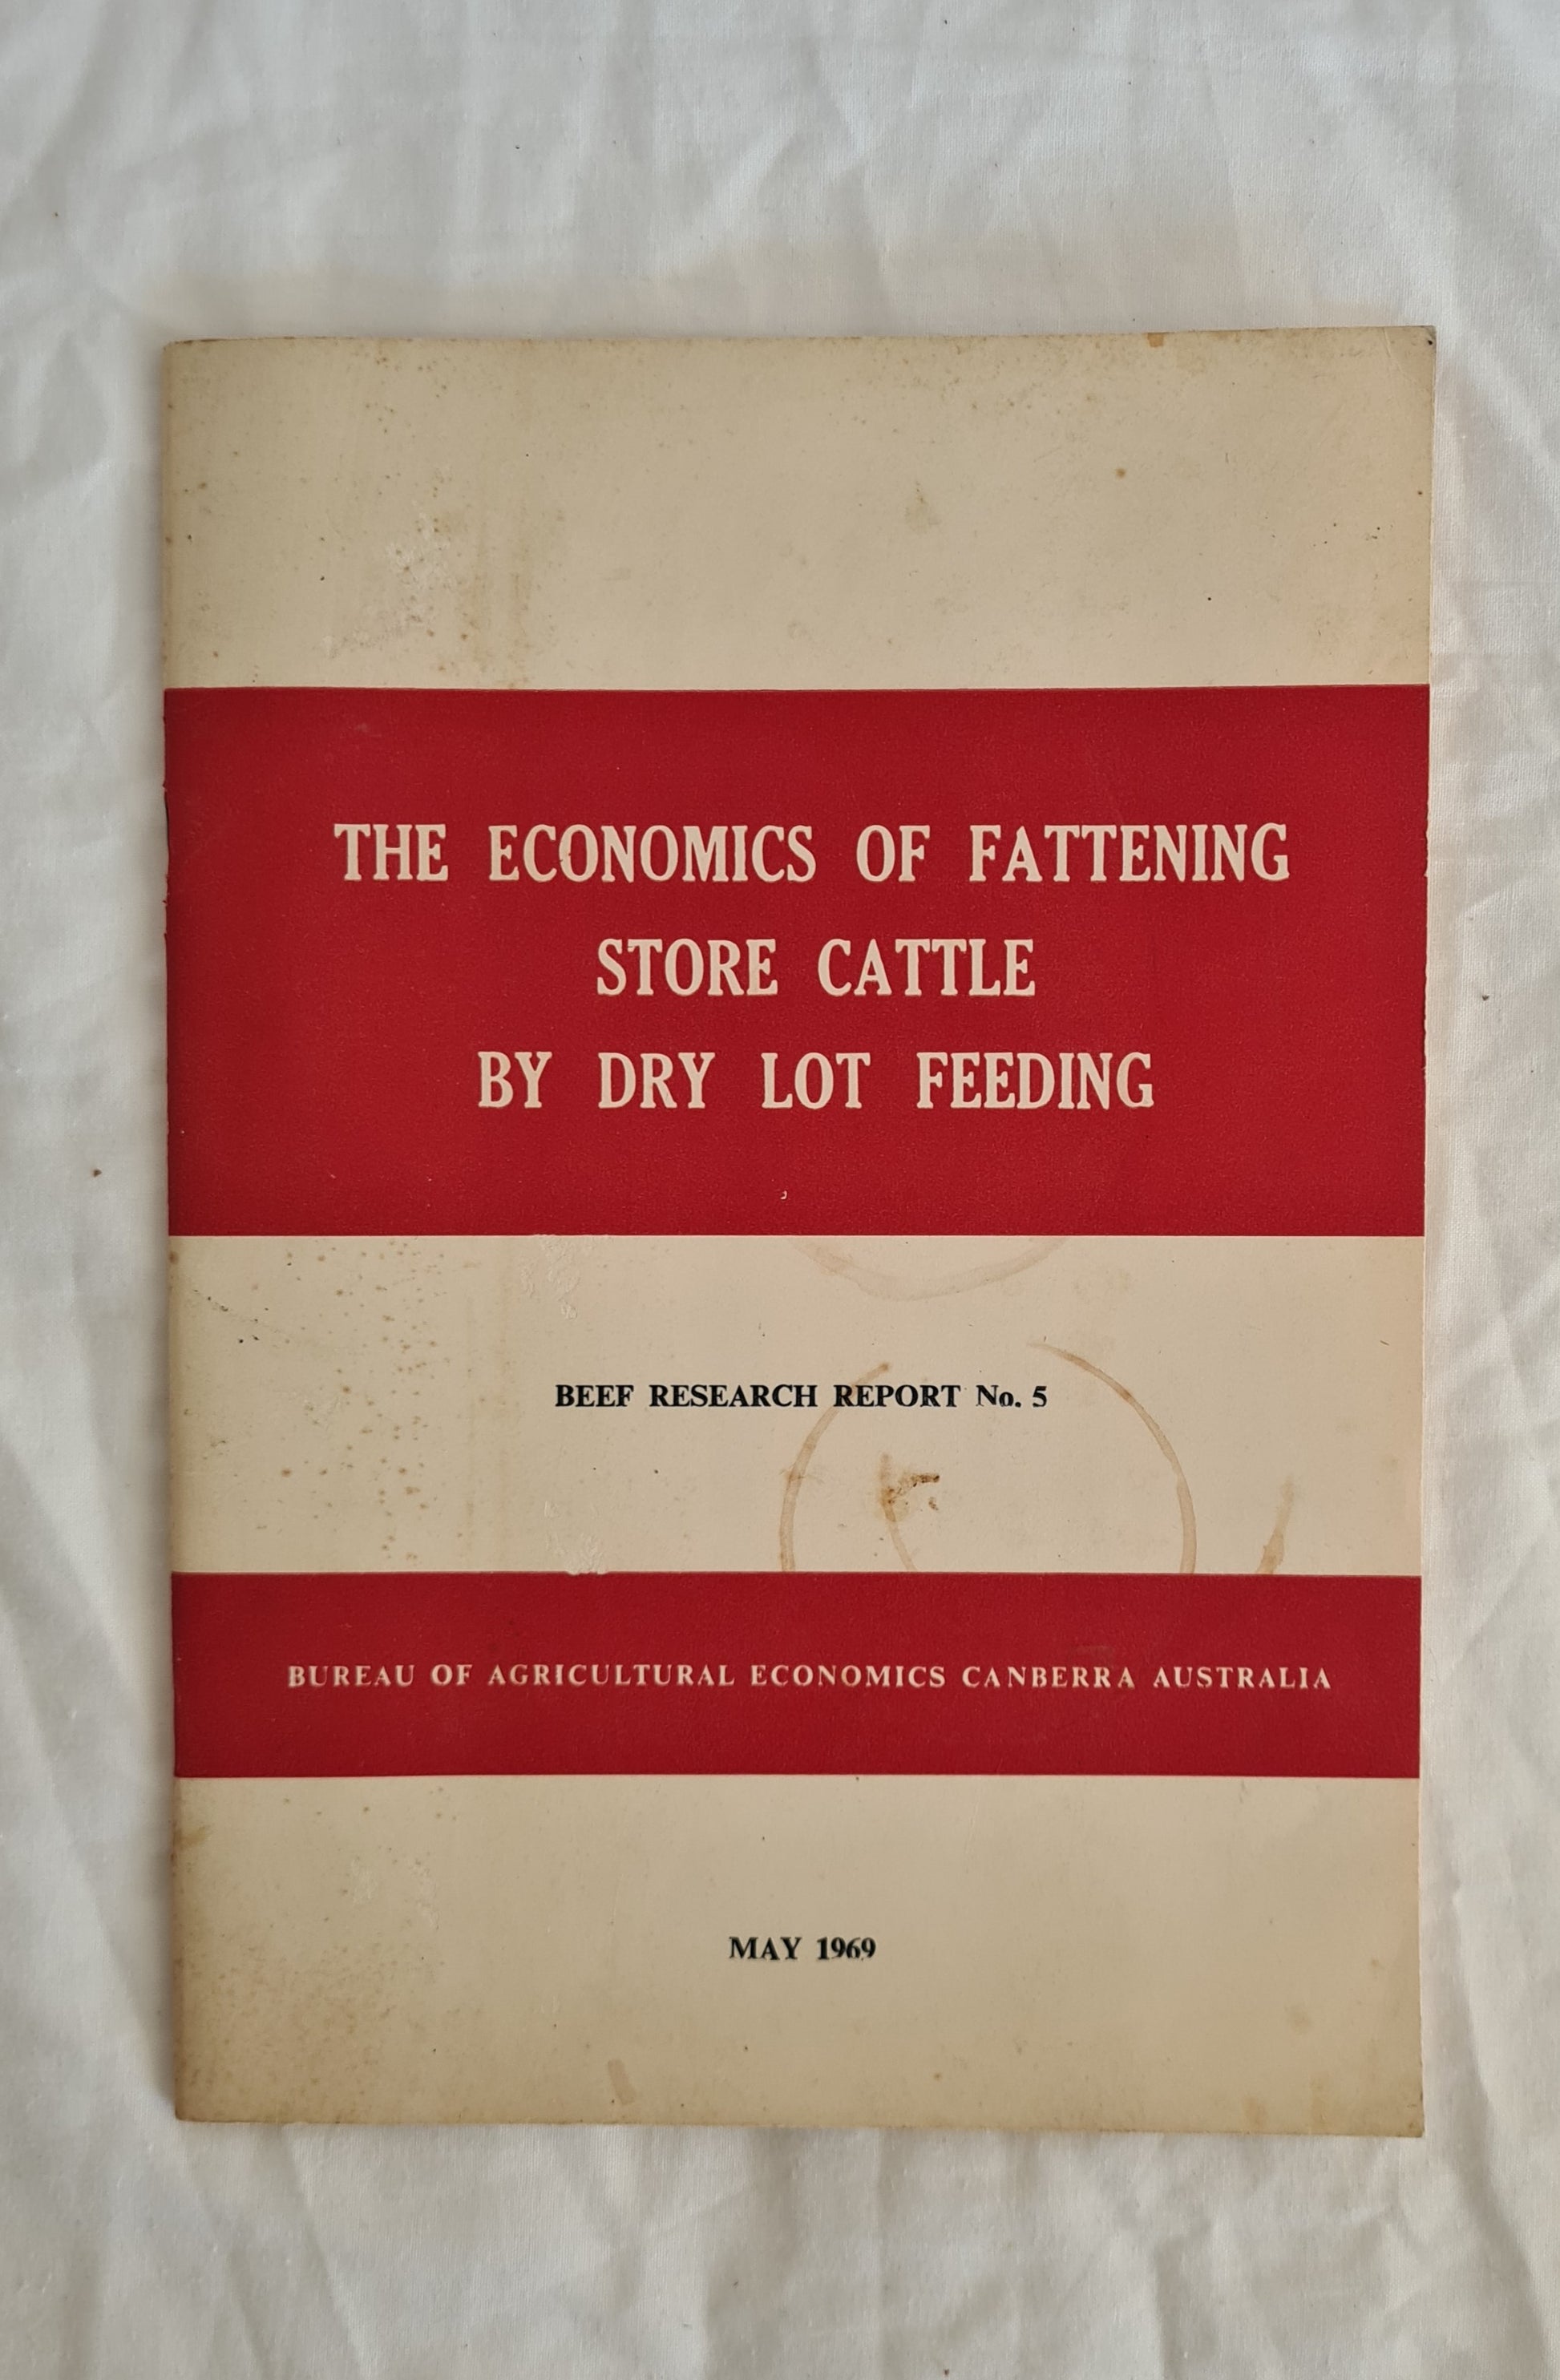 The Economics of Fattening Store Cattle by Dry Lot Feeding  Beef Research Report No. 5